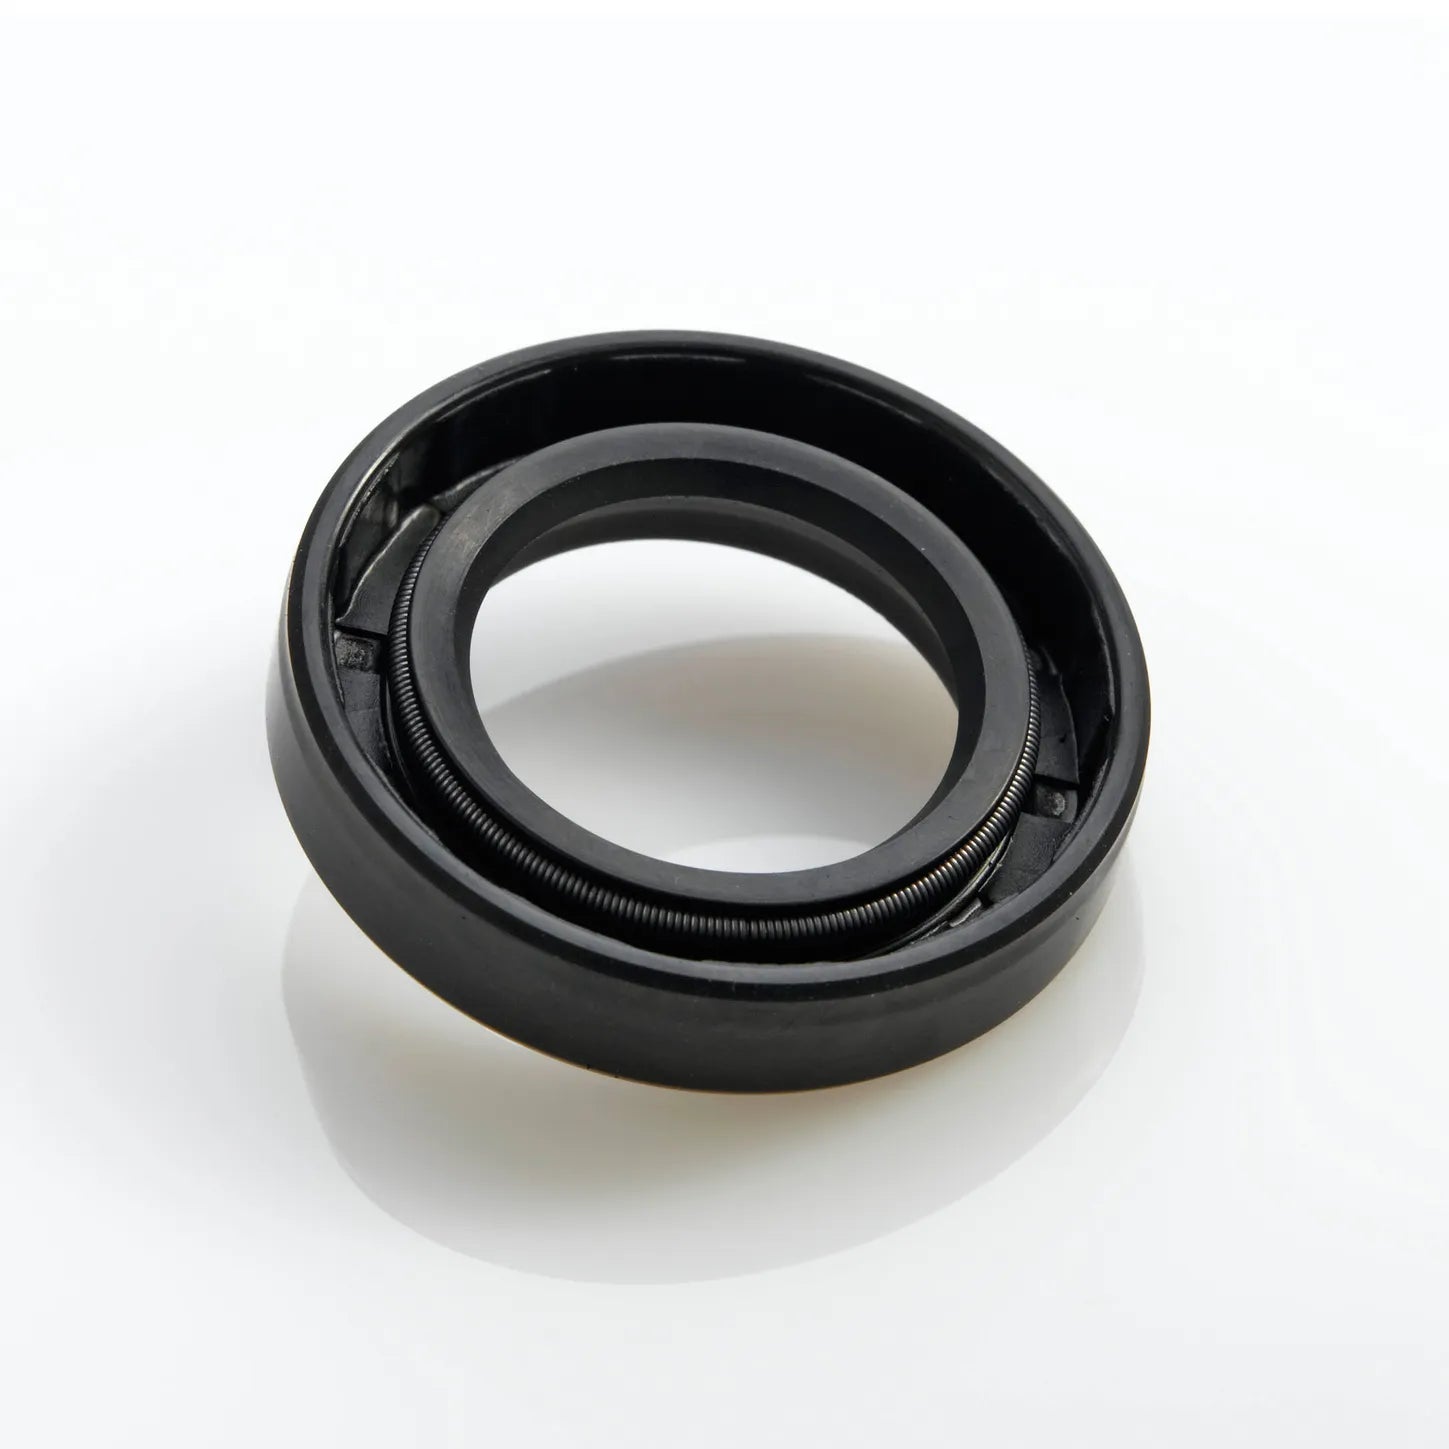 Oil Seal, Comparable to Waters # WAT005081, Old # WAT025669